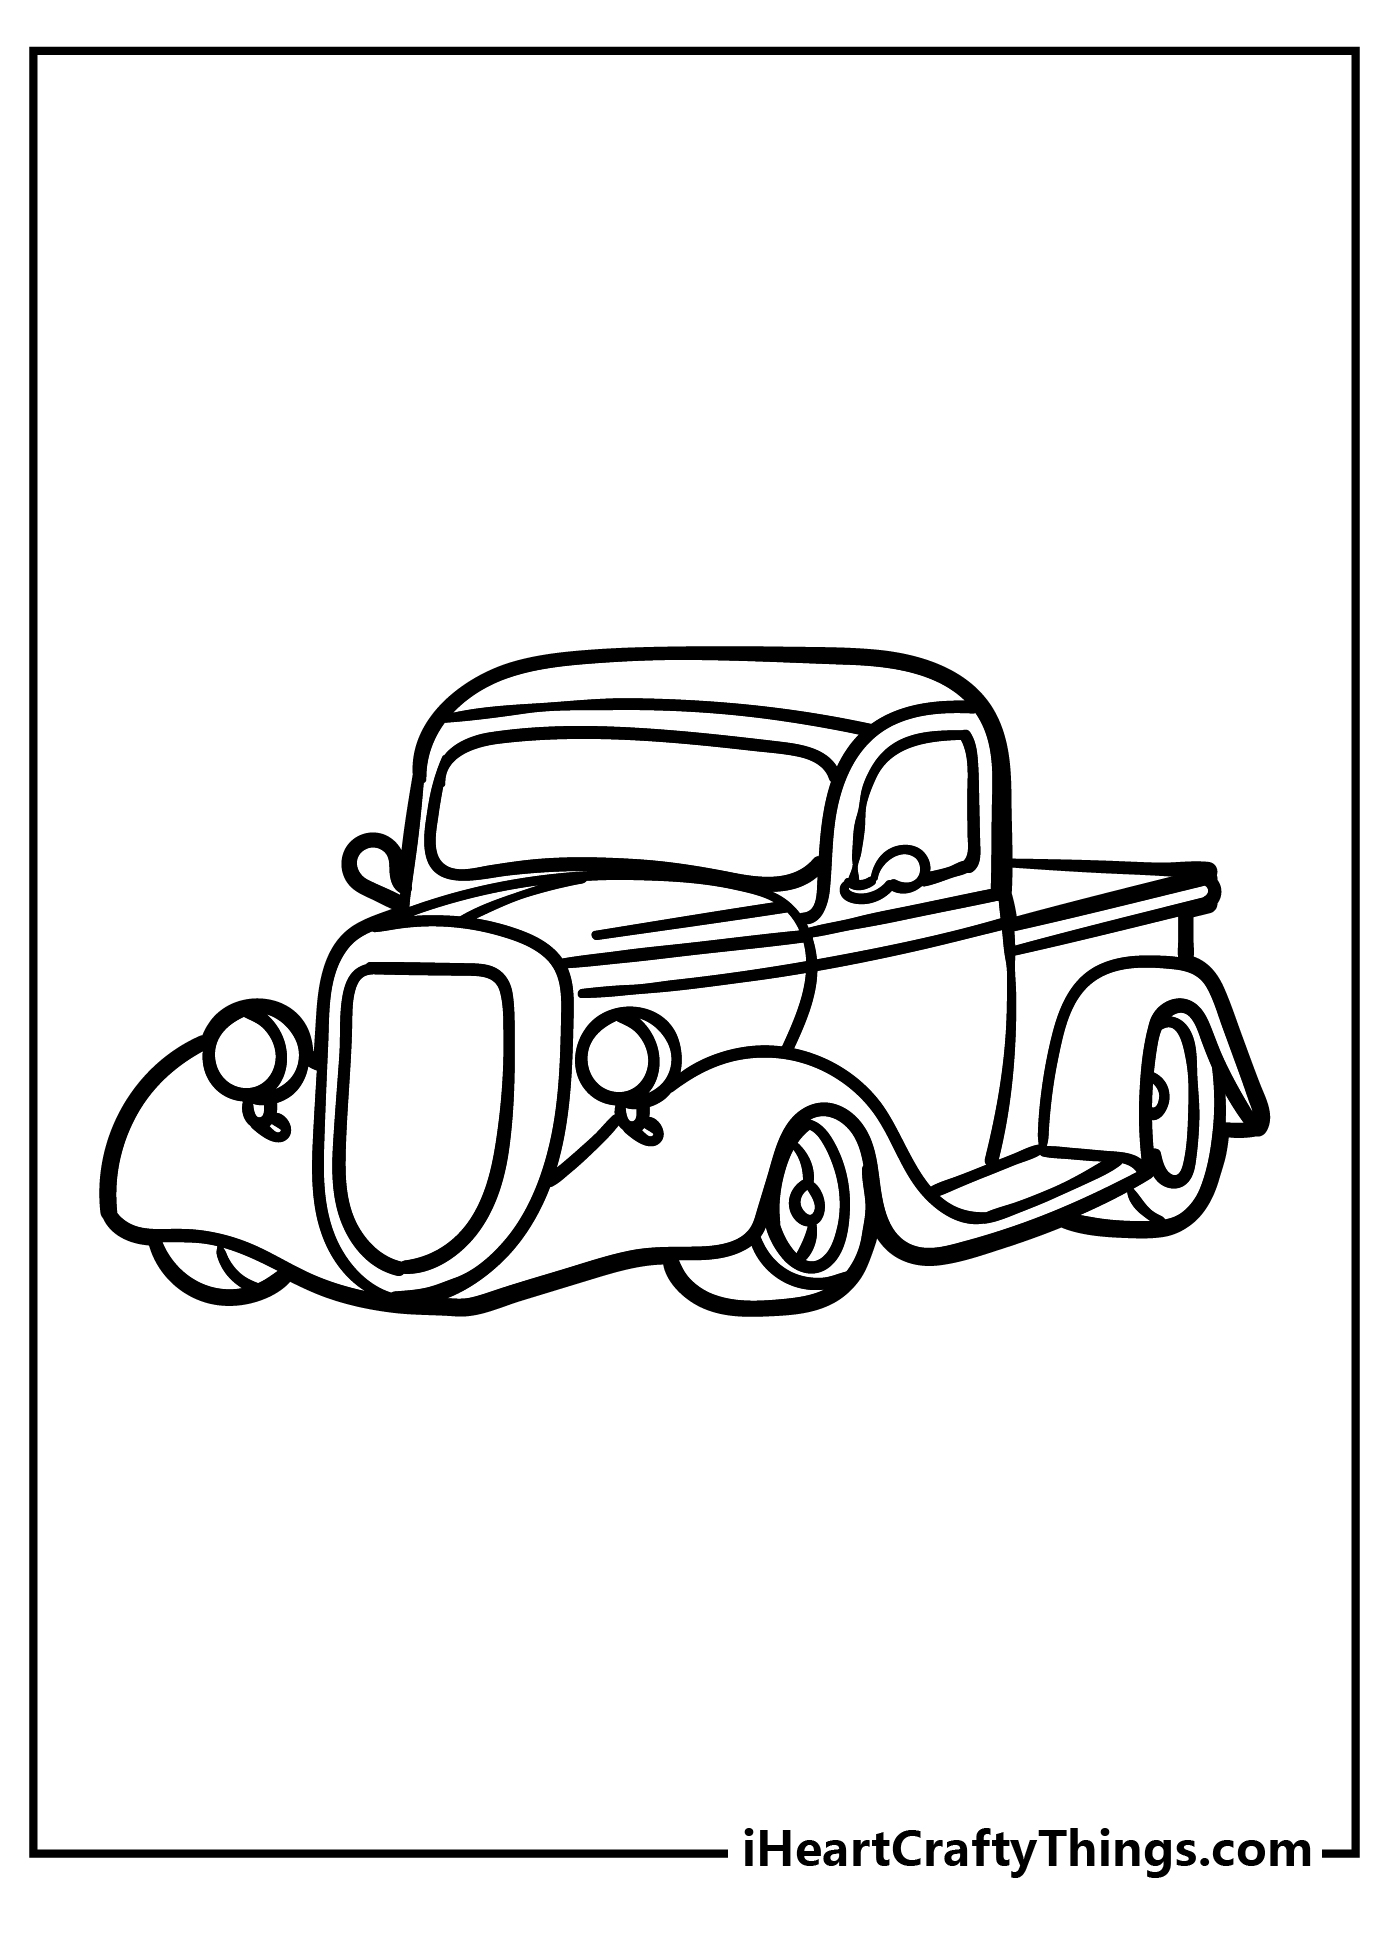 Hot Rod Coloring Pages for preschoolers free printable